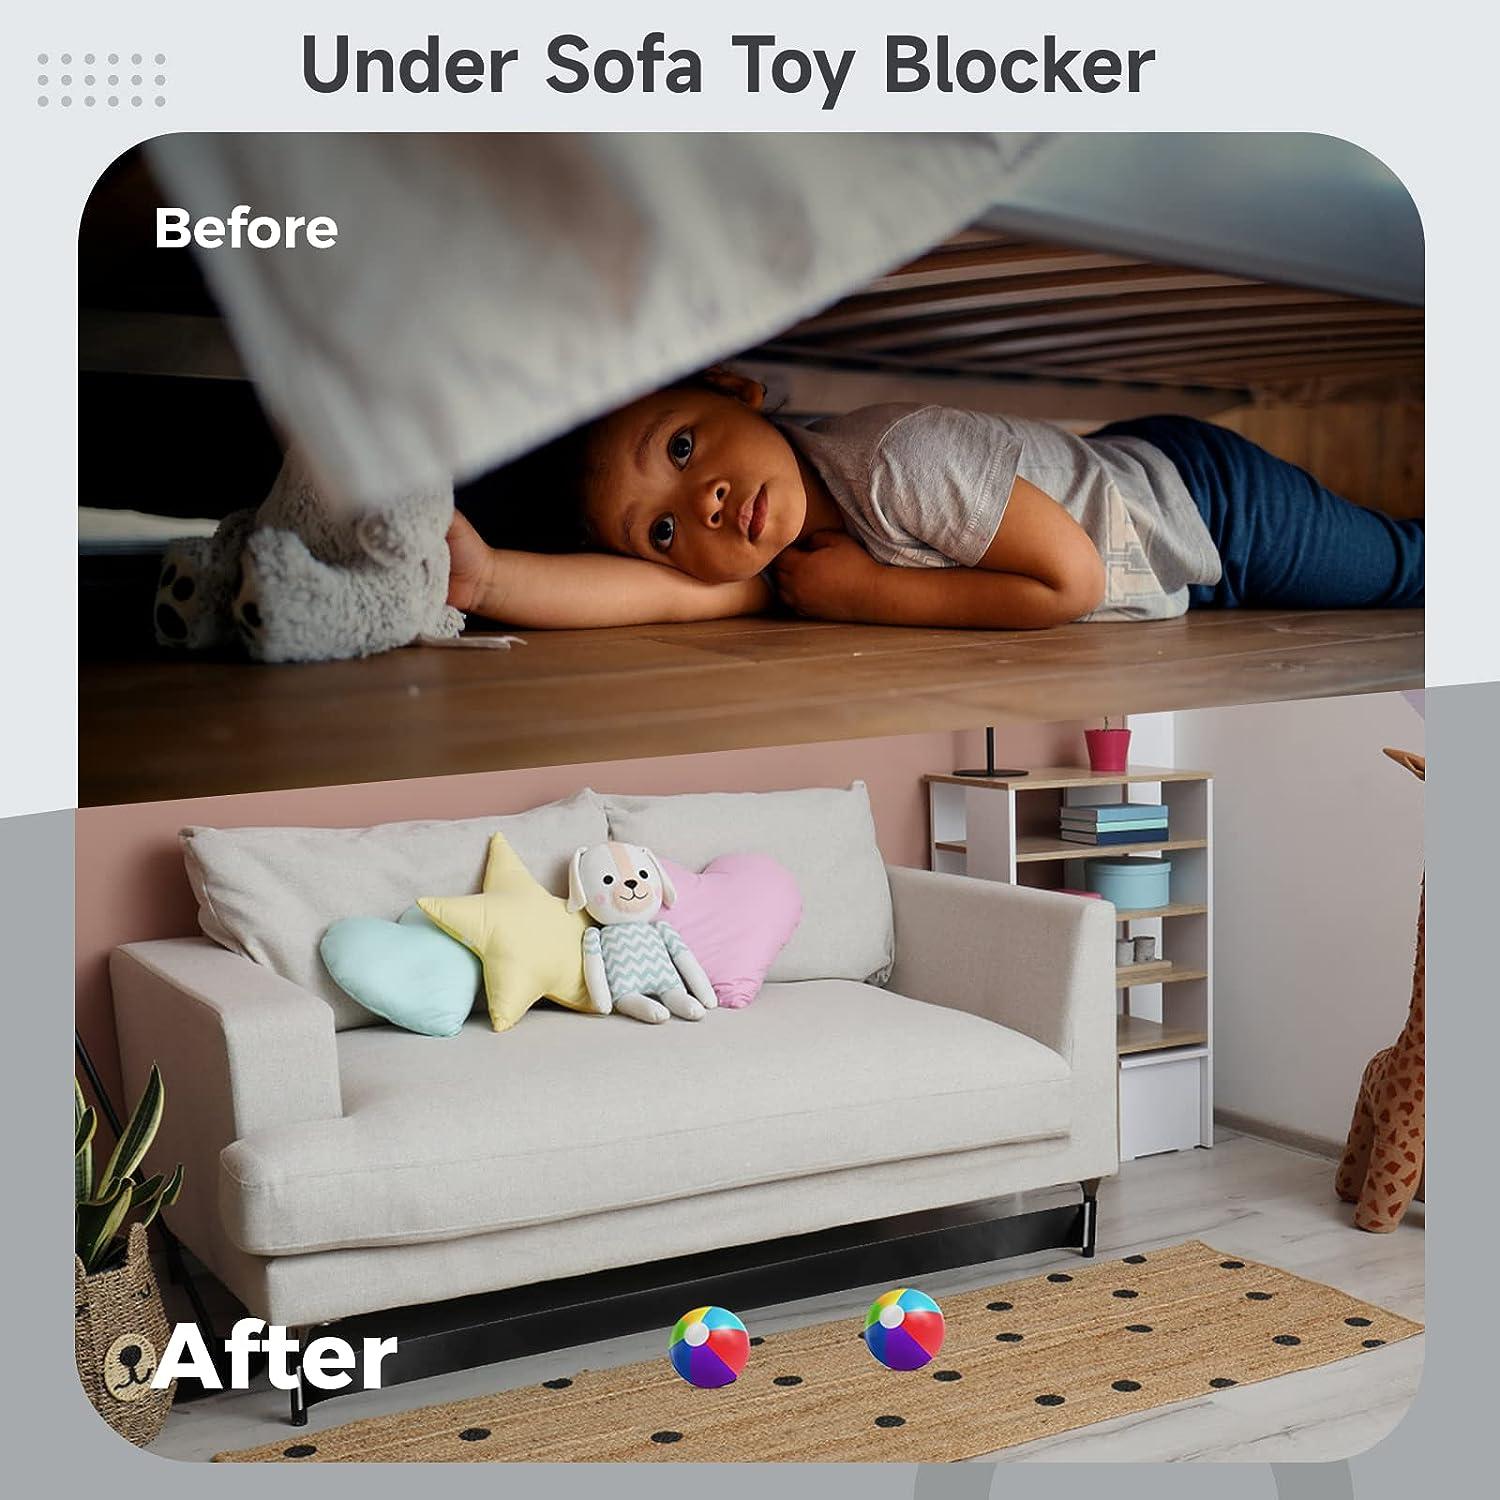 Gap Bumper: Stop Toys from Rolling Under Furniture  